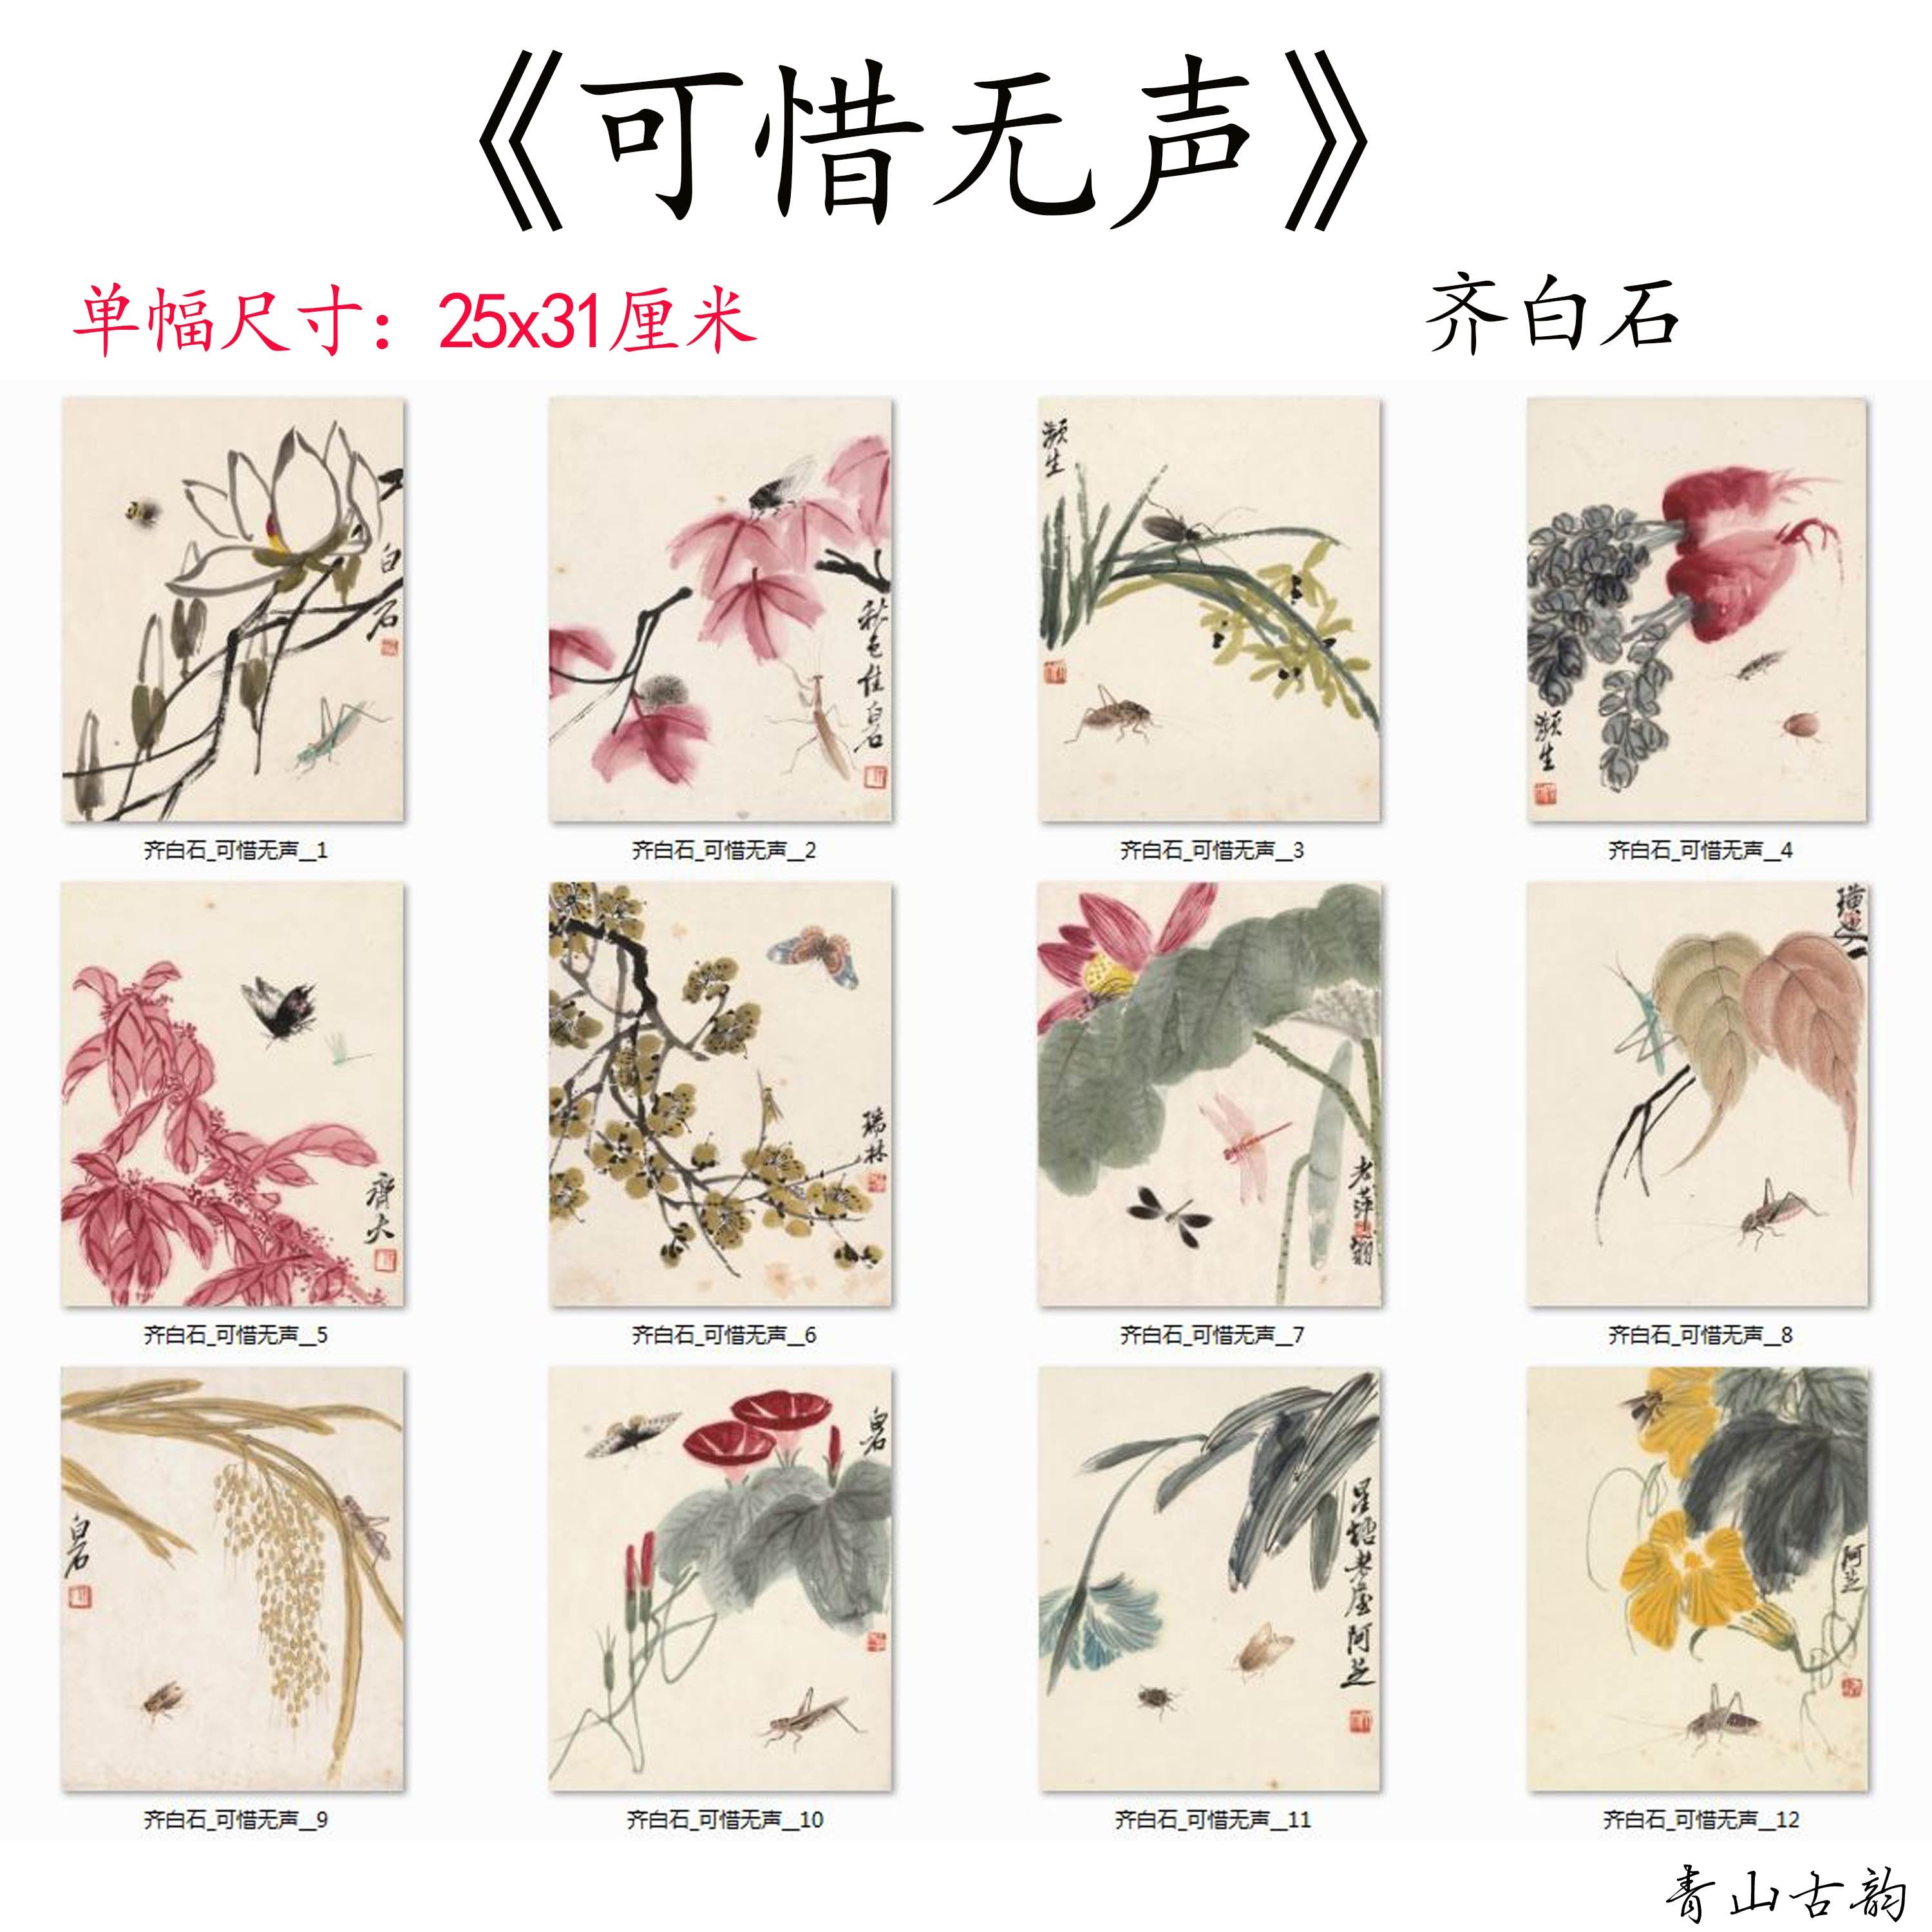 Chinese Antique Art Painting Qi Baishi, it's a pity that there is no sound